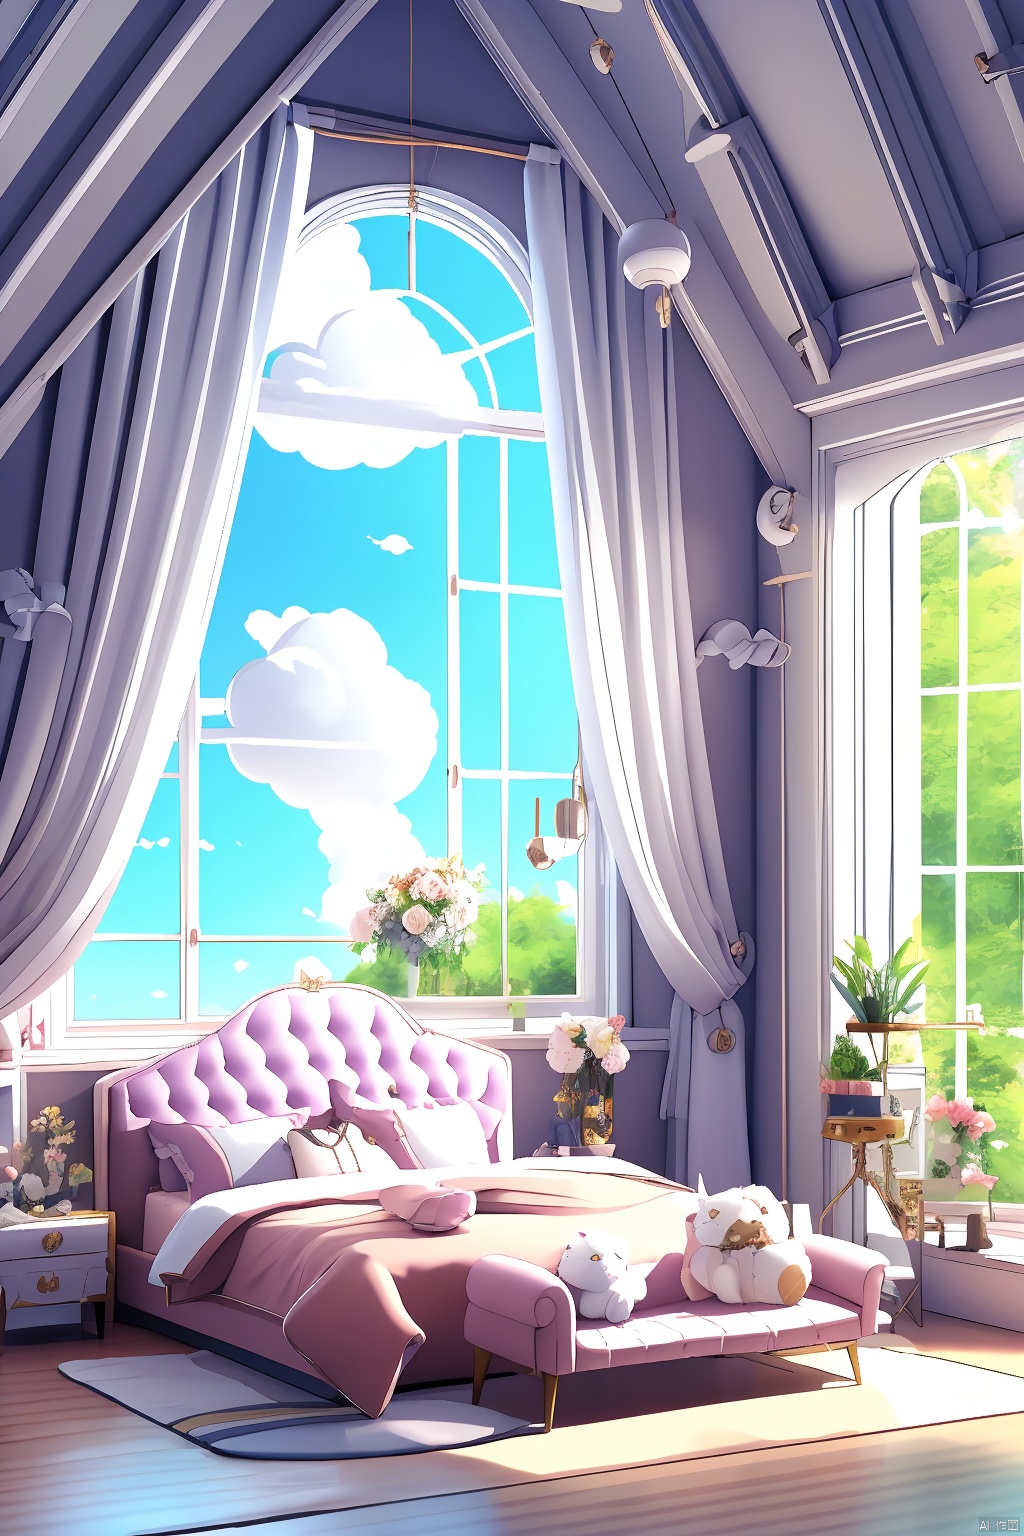  Bare thigh,extremely detailed CG unity 8k wallpaper,illustration,lens 135mm,masterpiece, best quality, no humans, flower, virtual youtuber, indoors, bed, pillow, window, stuffed toy, girl’s bedroom,table, cat, stuffed animal, bell, chair, curtains, cloud, microphone, rose, day, white flower, neck bell, english text, sky, plant, scenery,blue tone ,no human